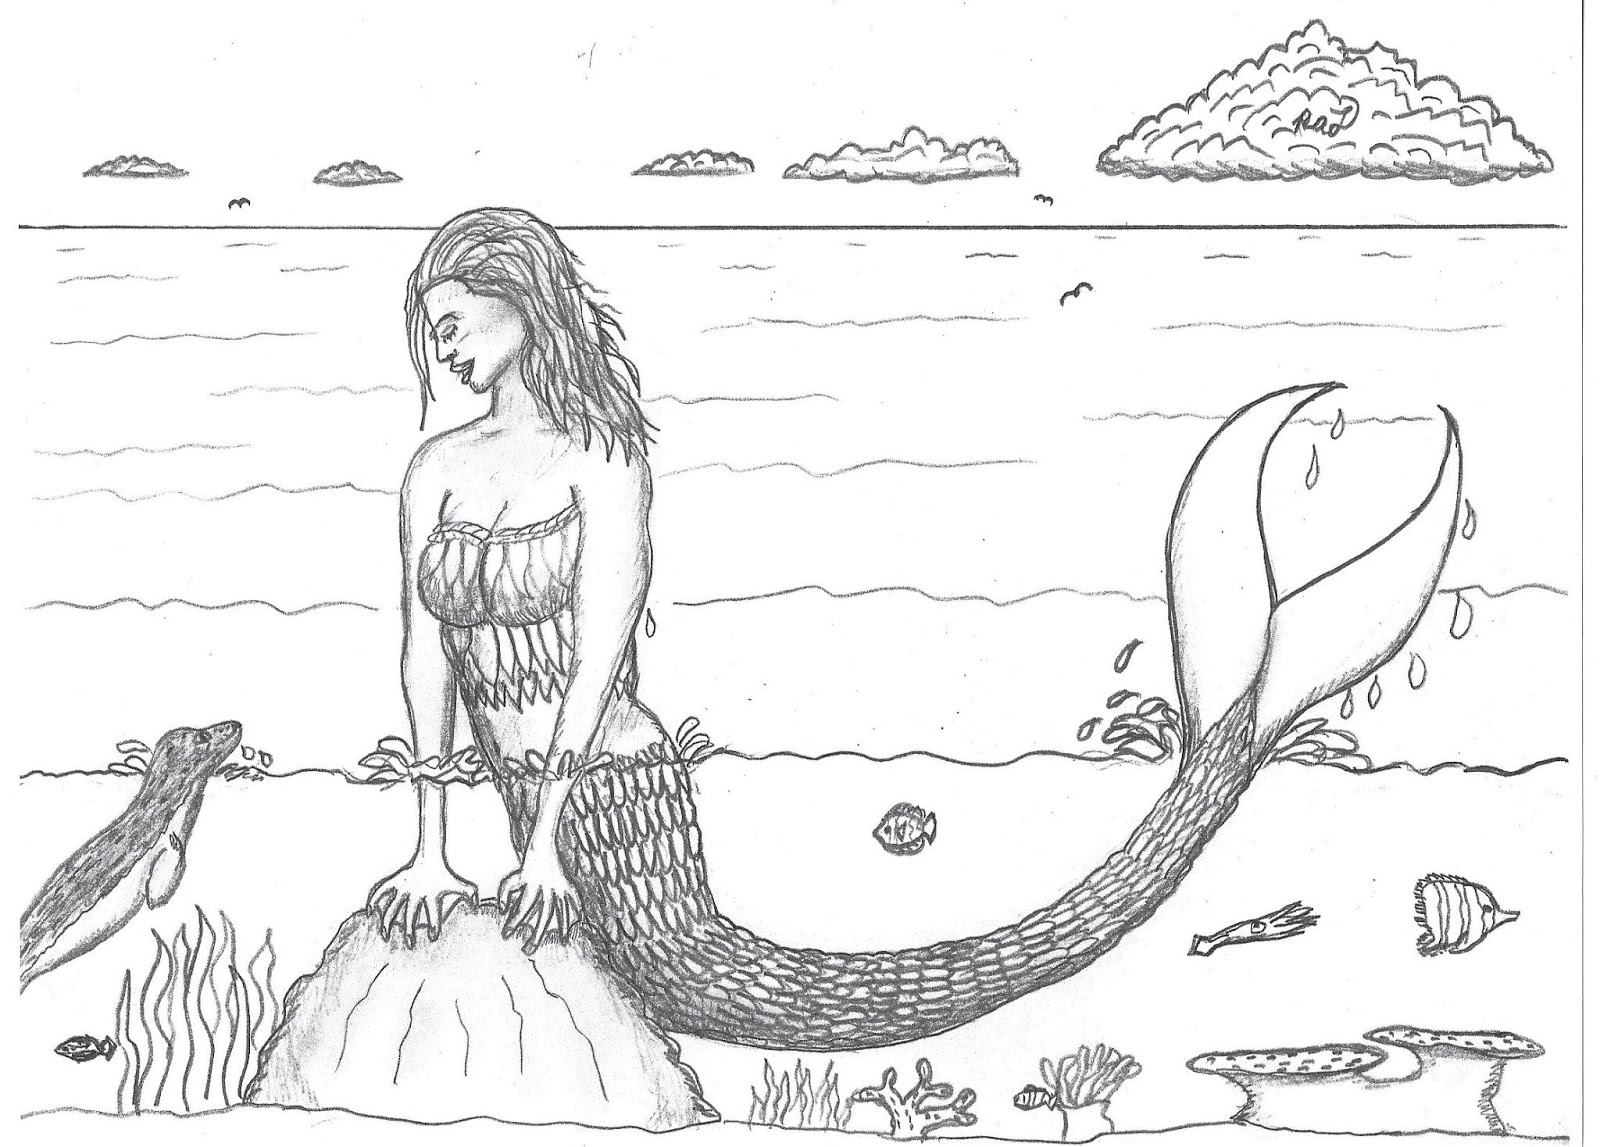 Robin's Great Coloring Pages: Mermaids and River Fairies coloring pages